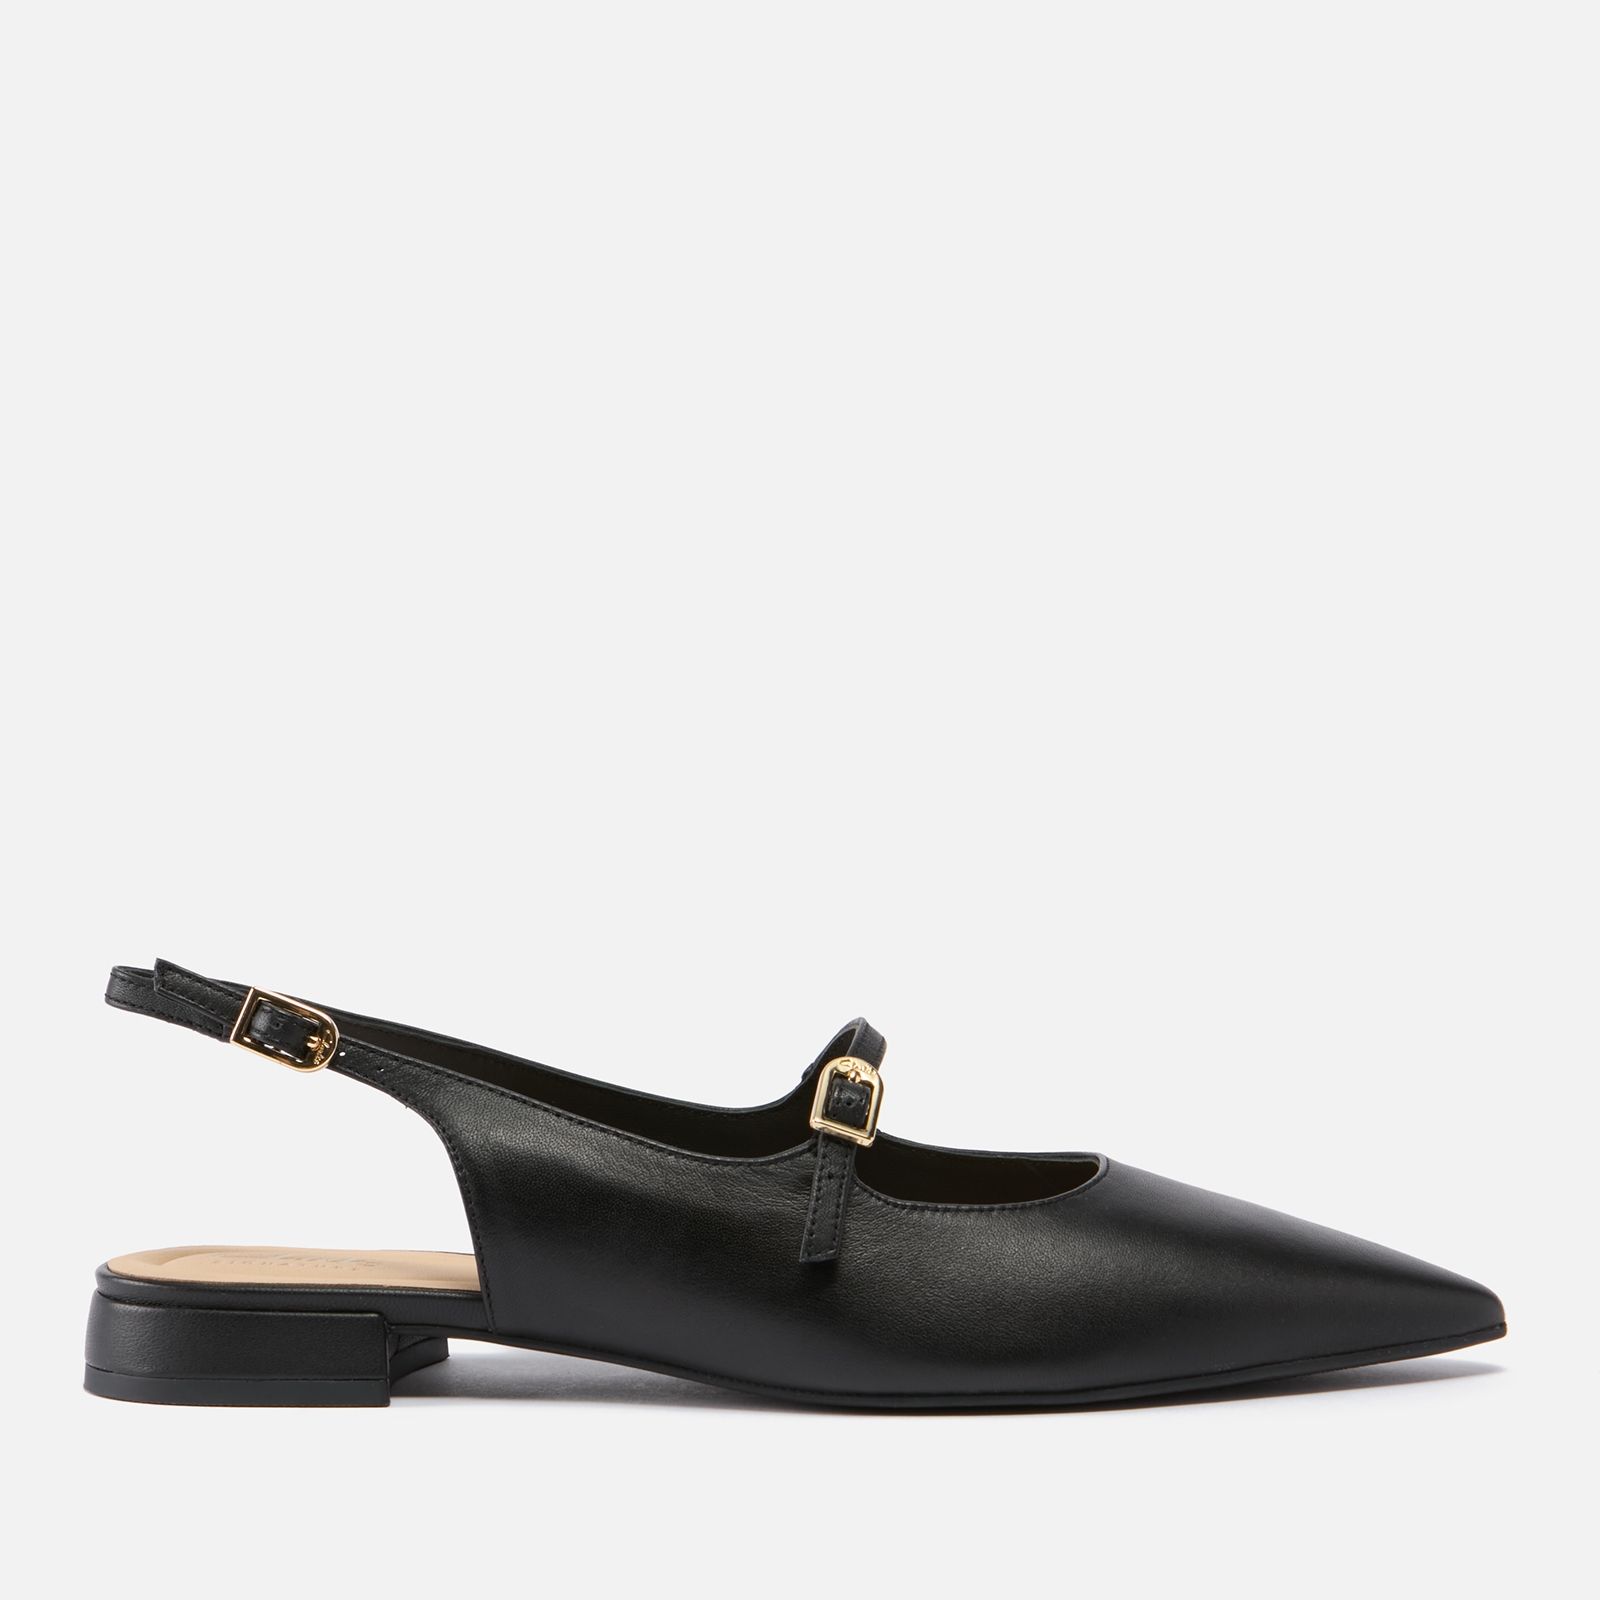 Clarks Women’s Sensa15 Patent-Leather Pointed-Toe Flats